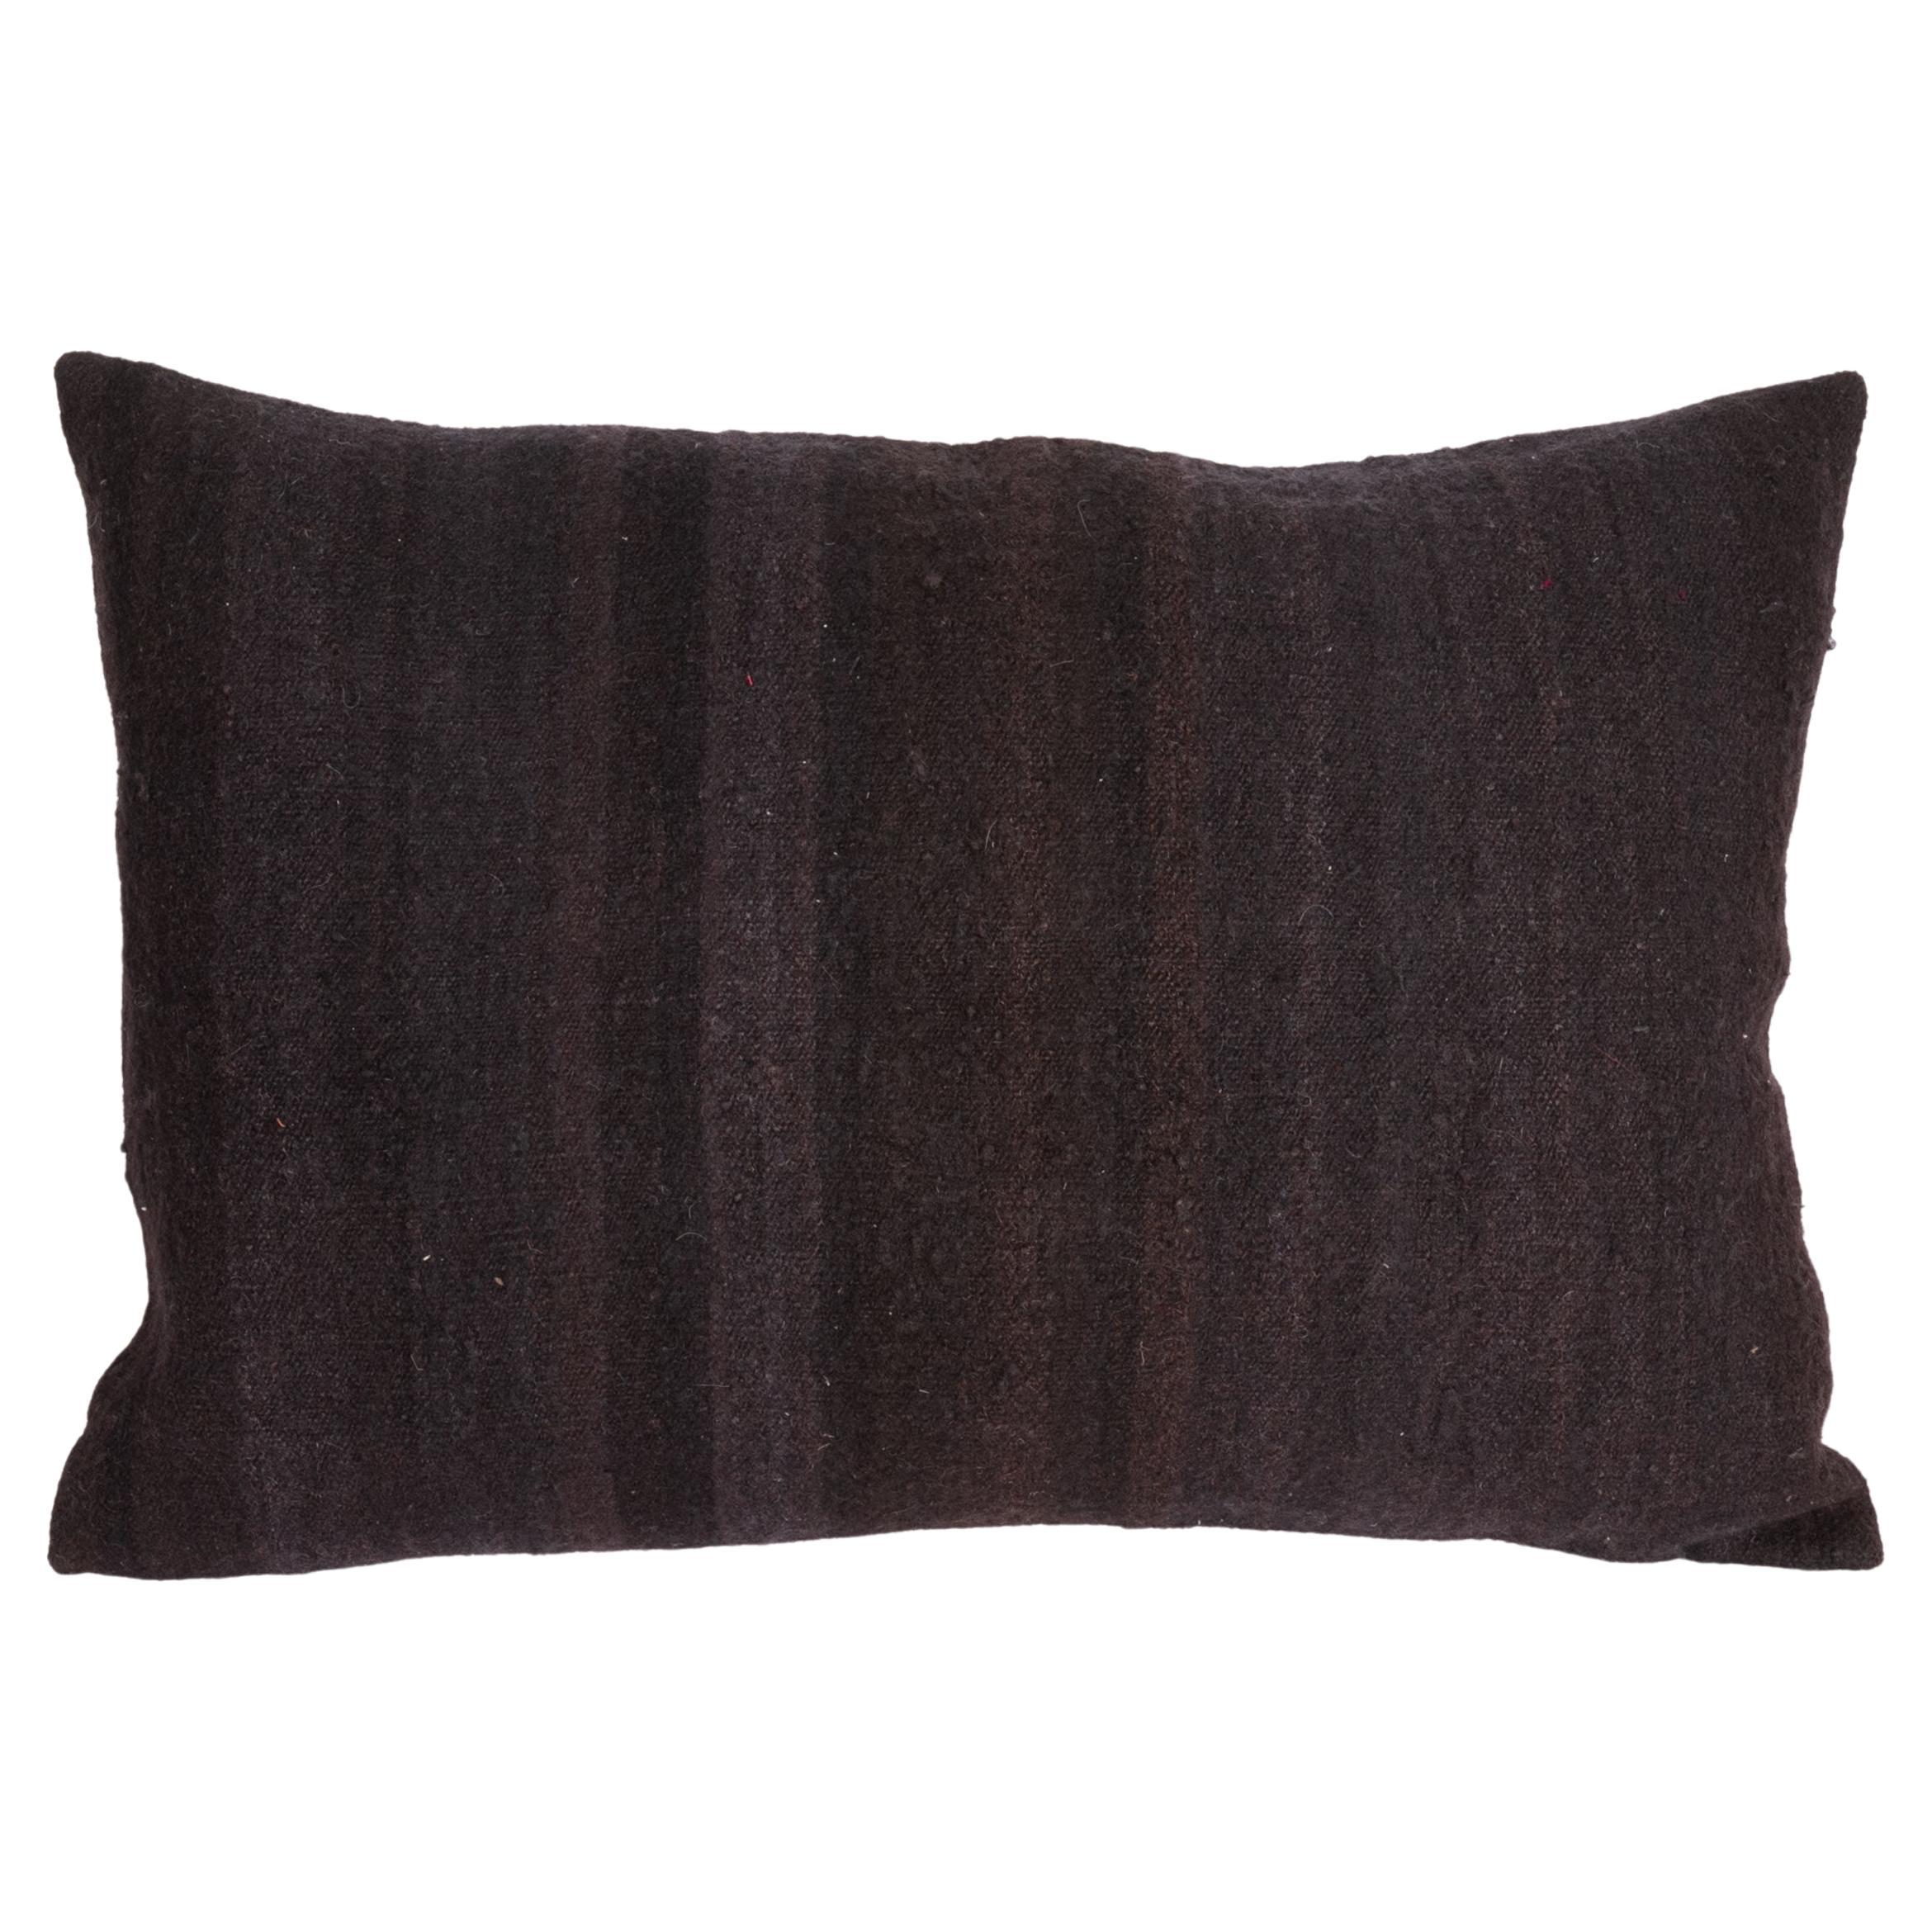 Black Pillow Covers Made from a Mıd 20th C. Turkısh Kilim For Sale at  1stDibs